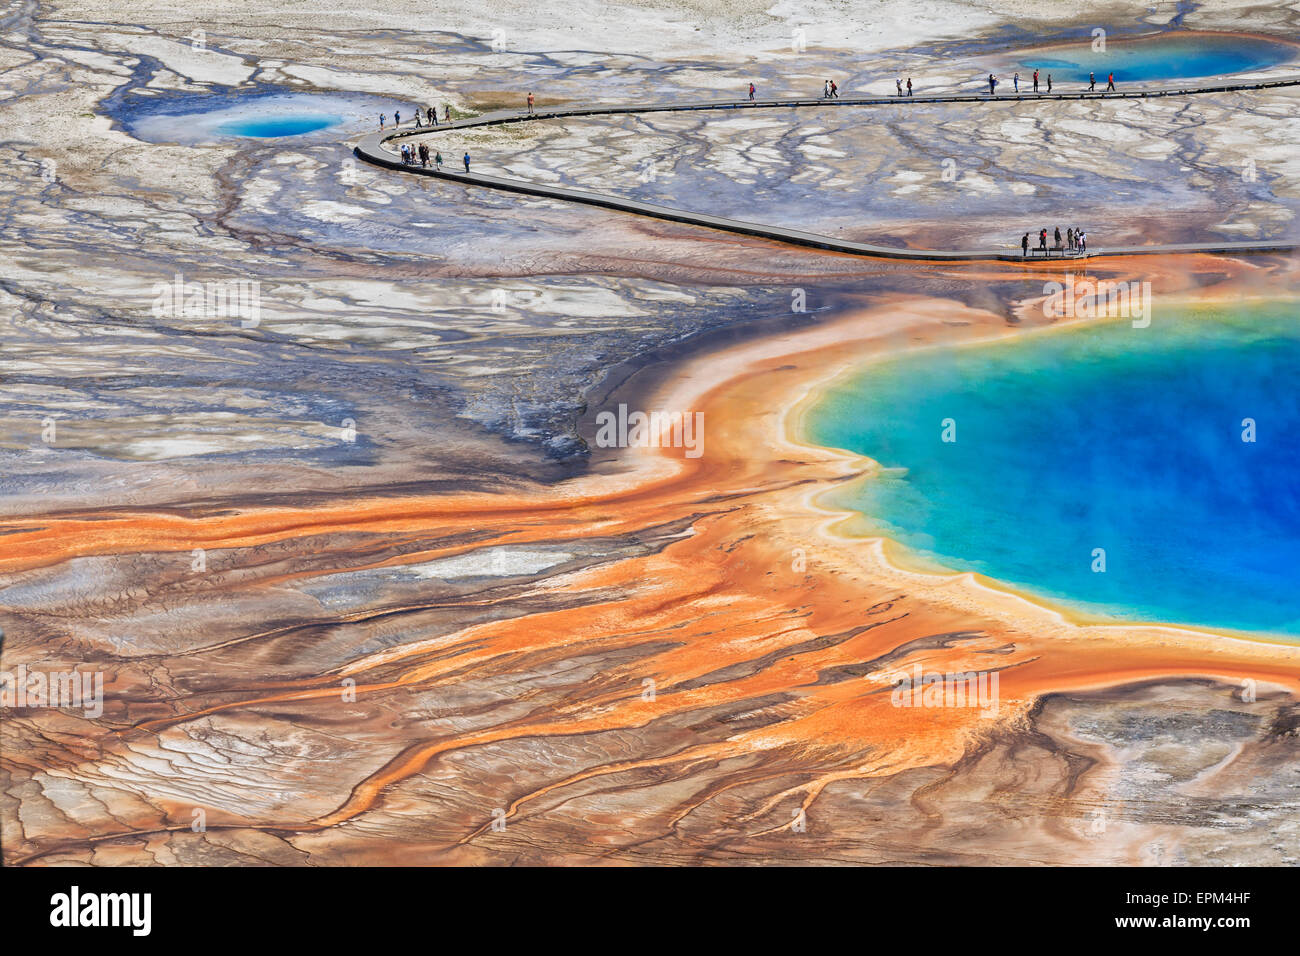 Etats-unis, Parc National de Yellowstone, Geyser Basin, Midway Geyser Basin, Grand Prismatic Spring, elevated view Banque D'Images